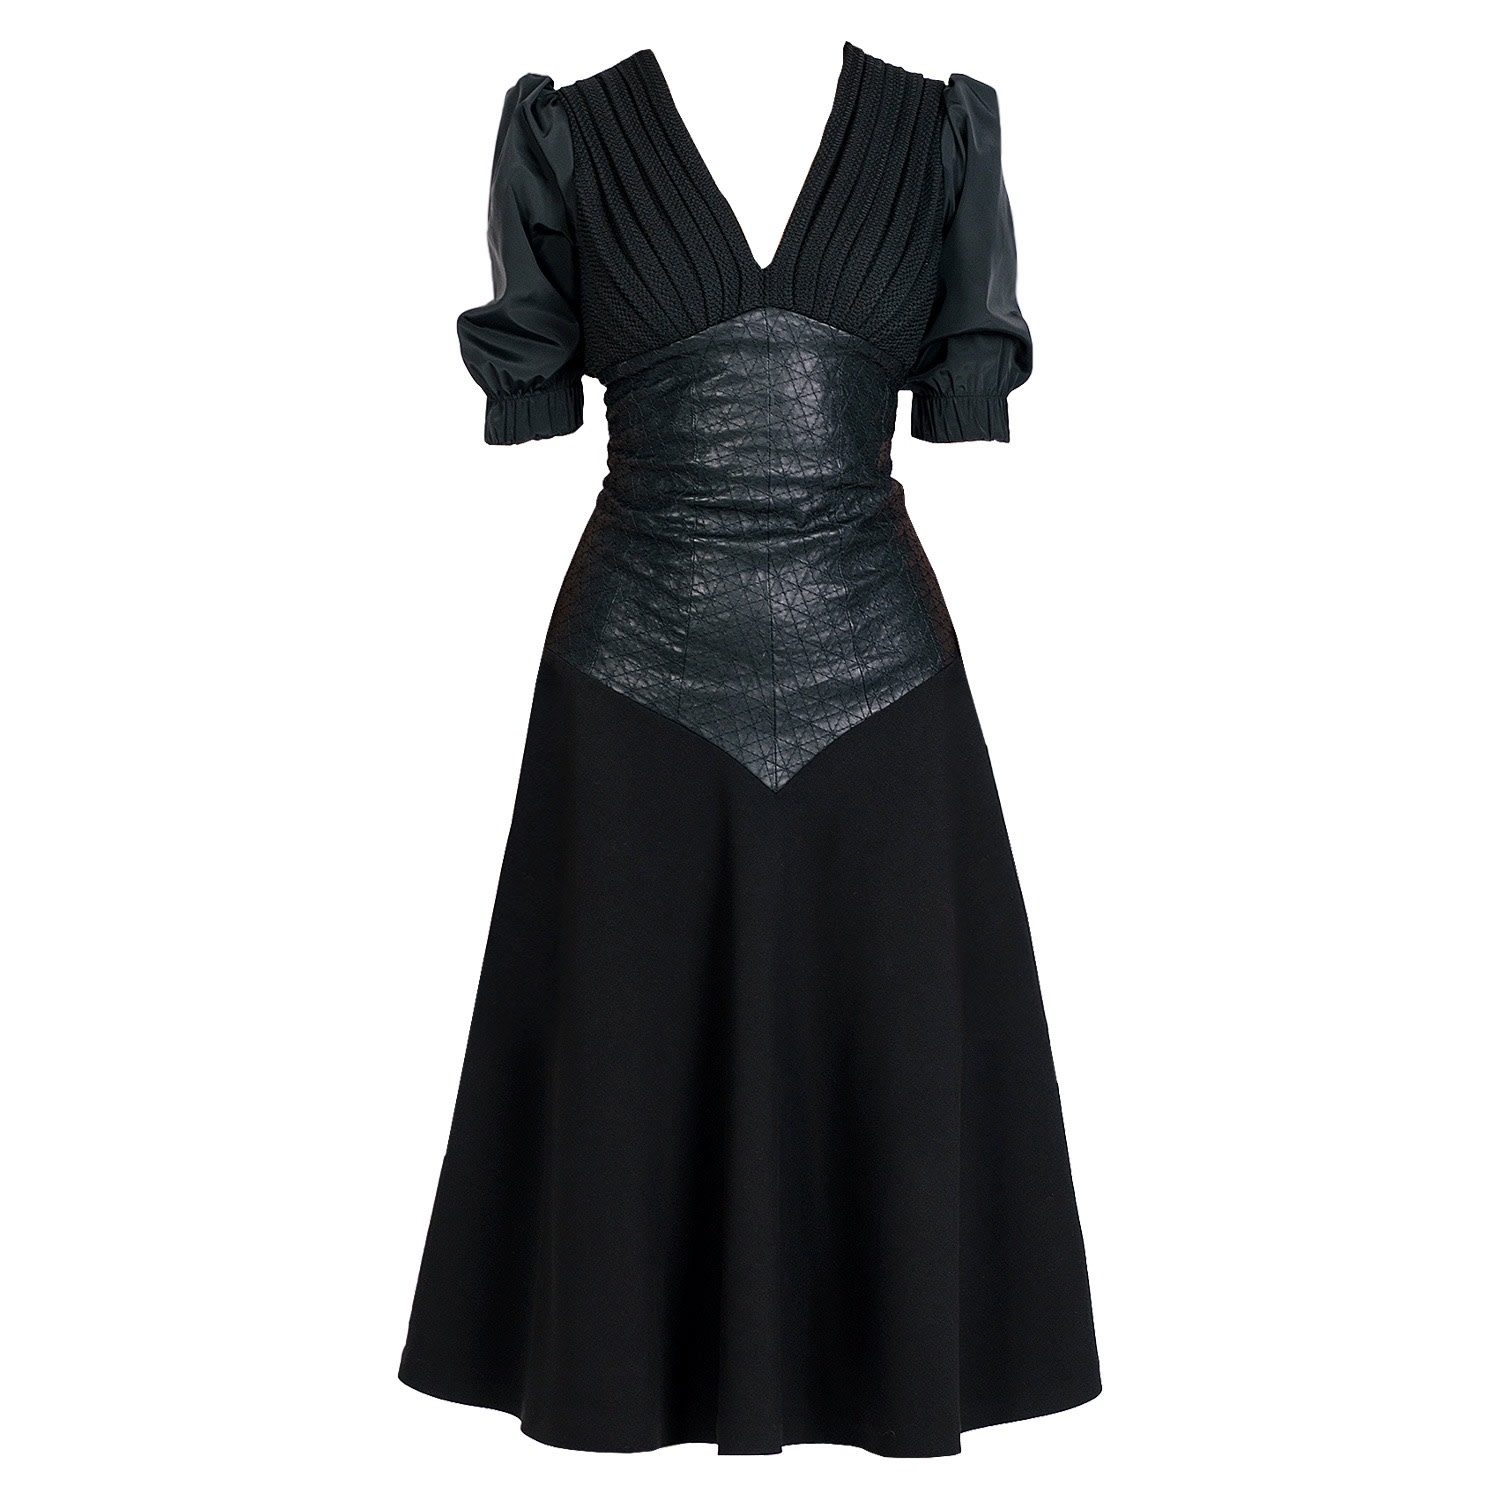 Women’s Baggy Sleeves Dress - Black Extra Small Maison Bogomil